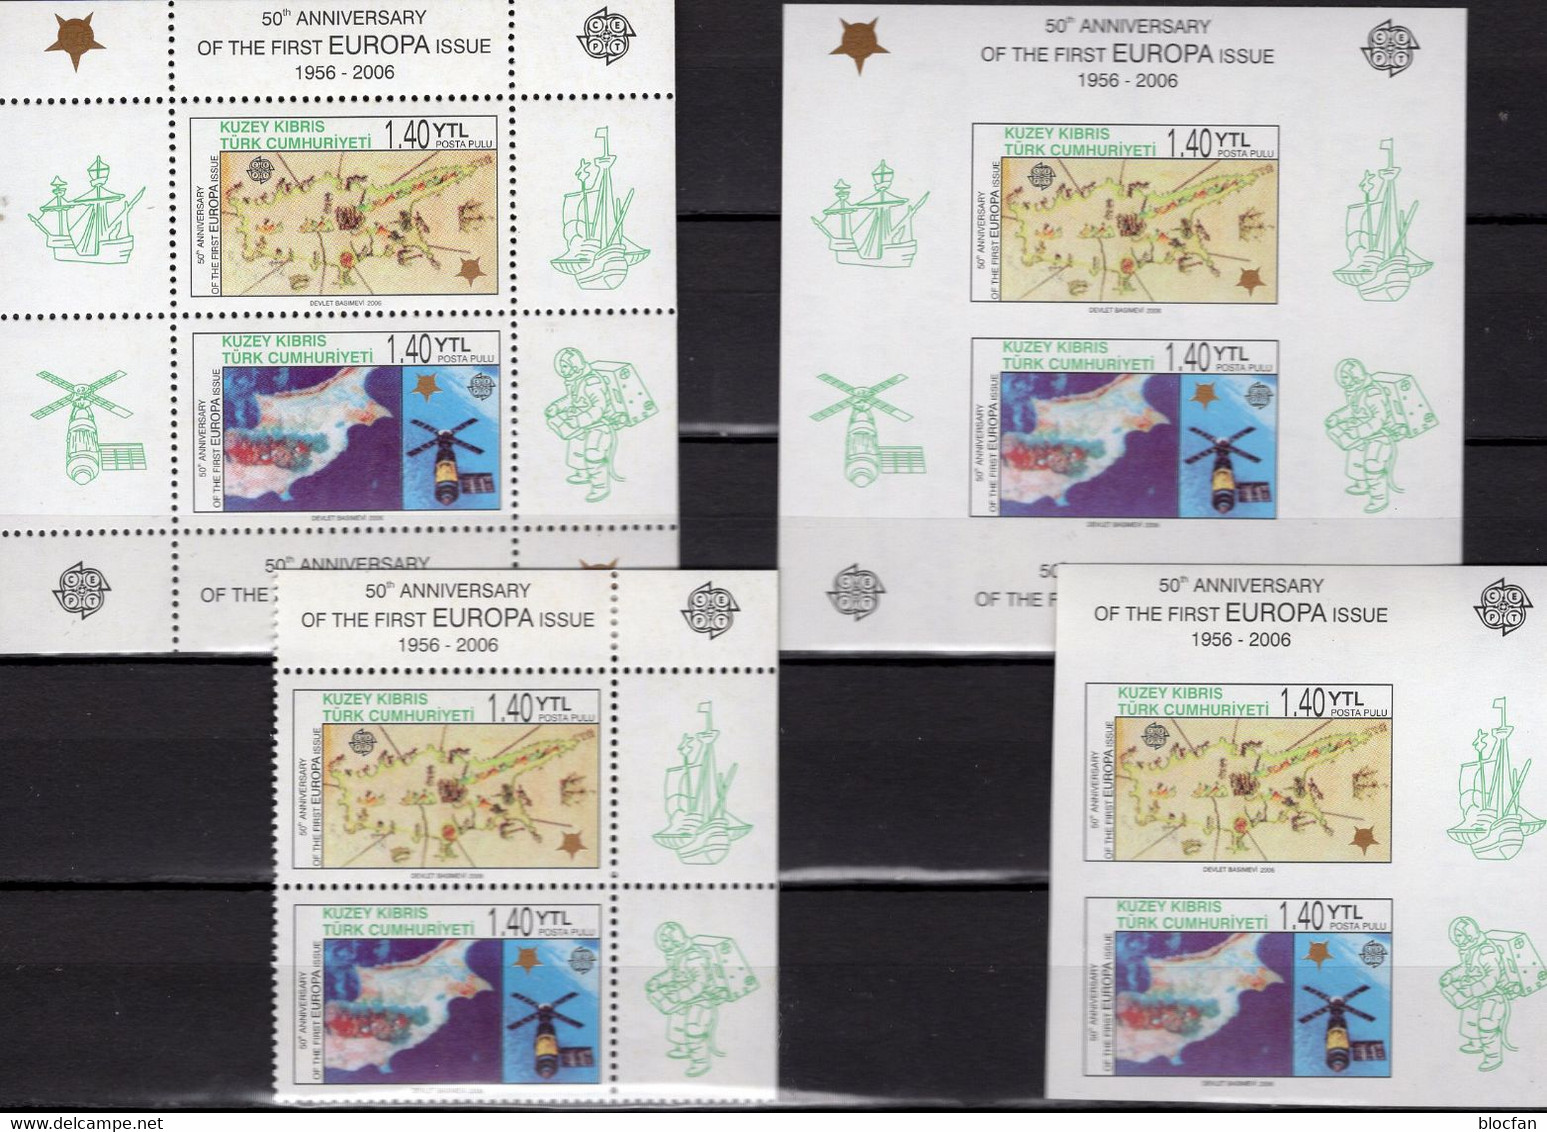 Blöcke CEPT 2006 TK-Zypern 630/1 2VB+Block 24A/B ** 28€ Stamps On Stamp M/s Hoja Blocs Ss Sheets Bf 50 Years EUROPE - Perfins